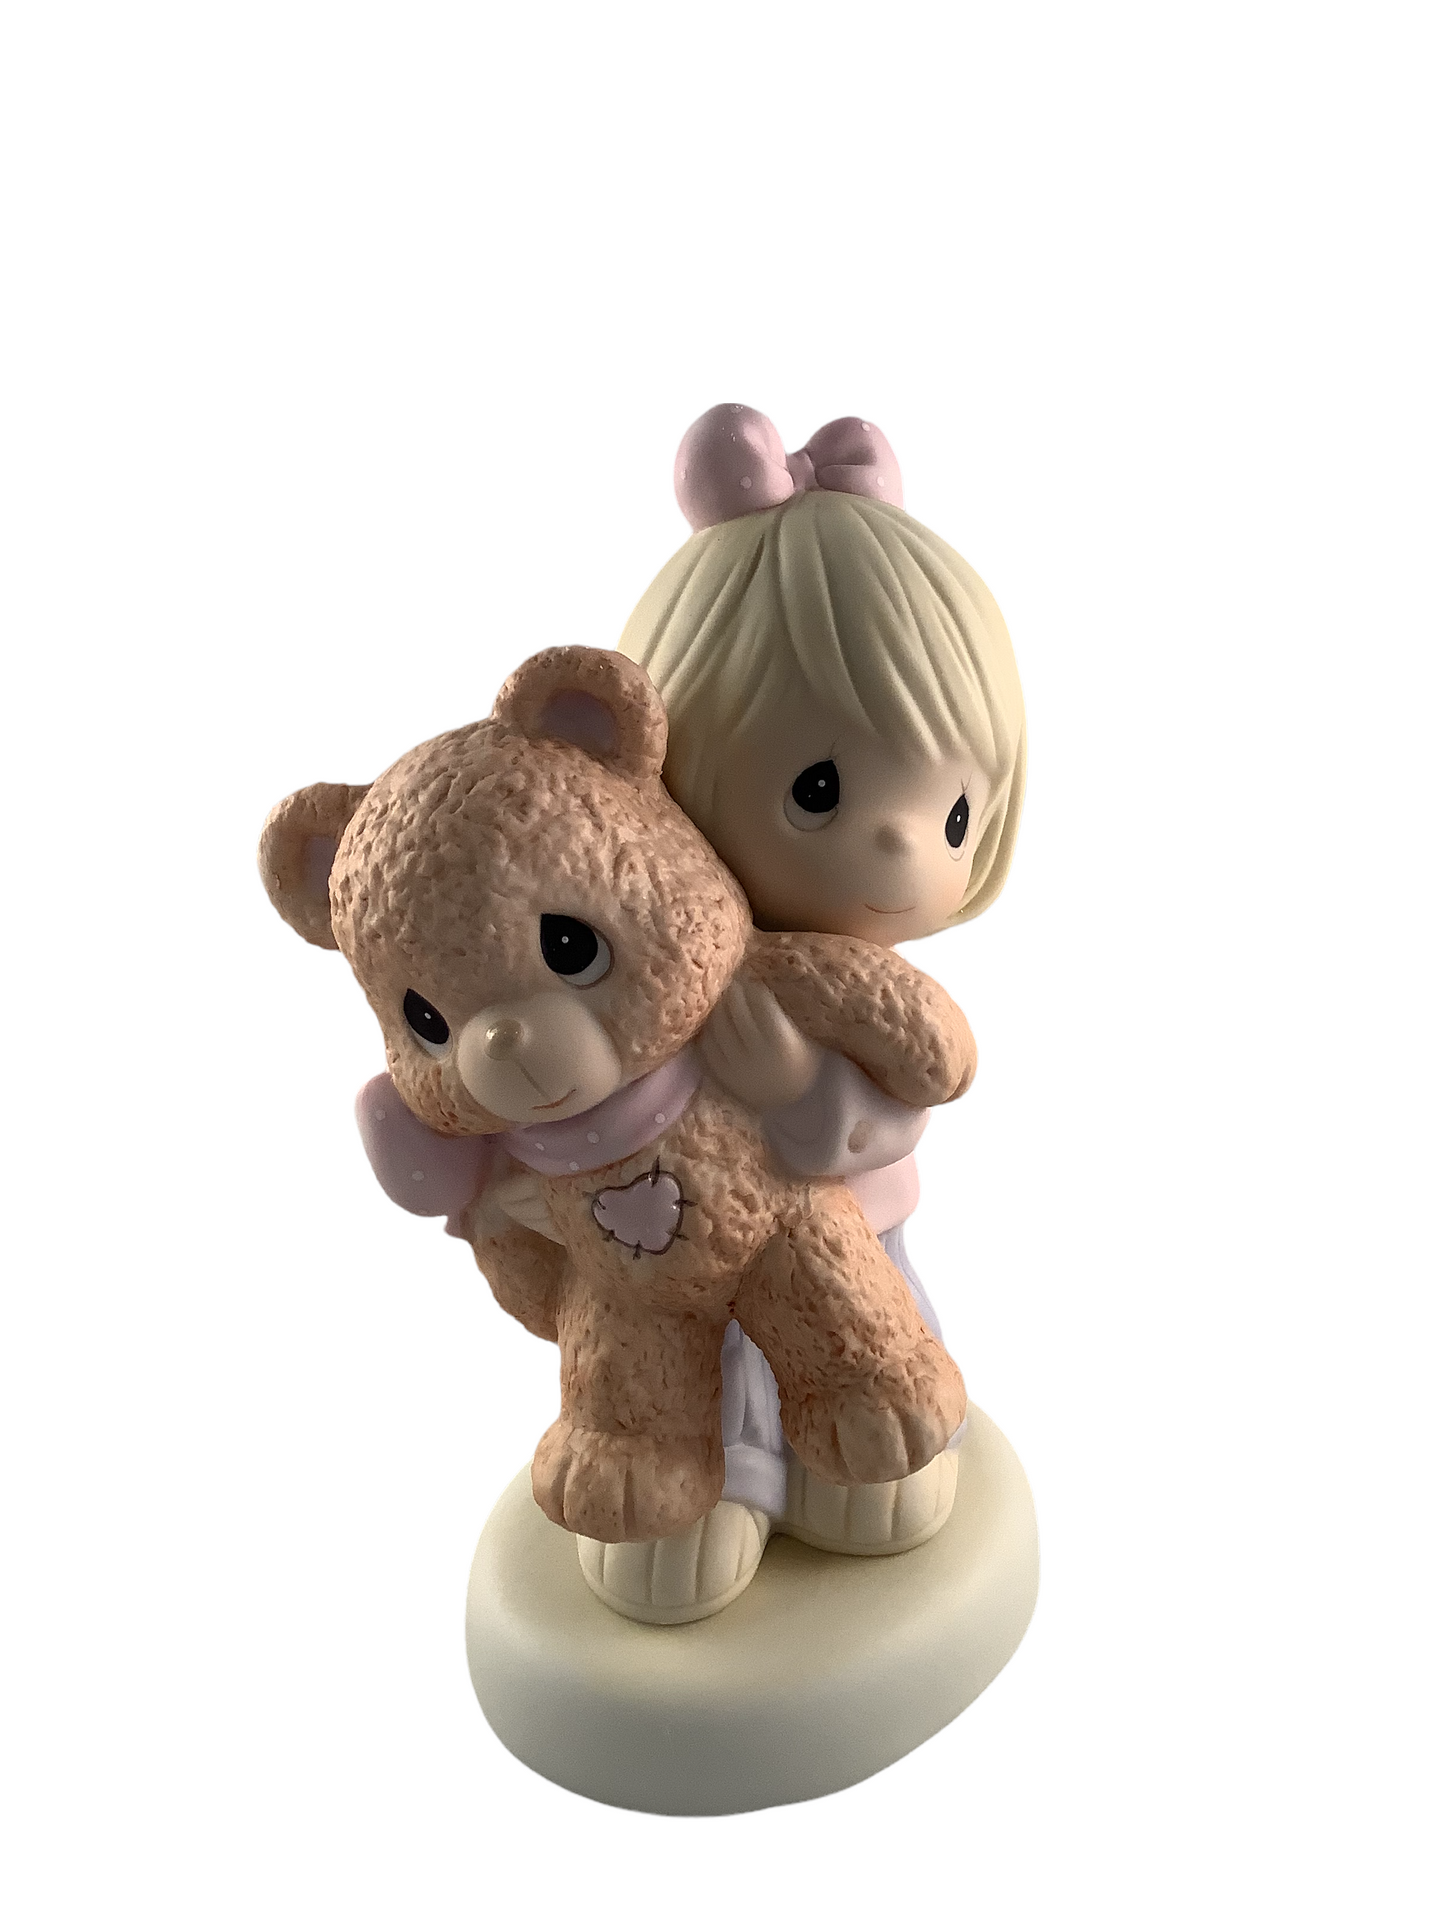 This Bears My Love For You - Precious Moment Figurine